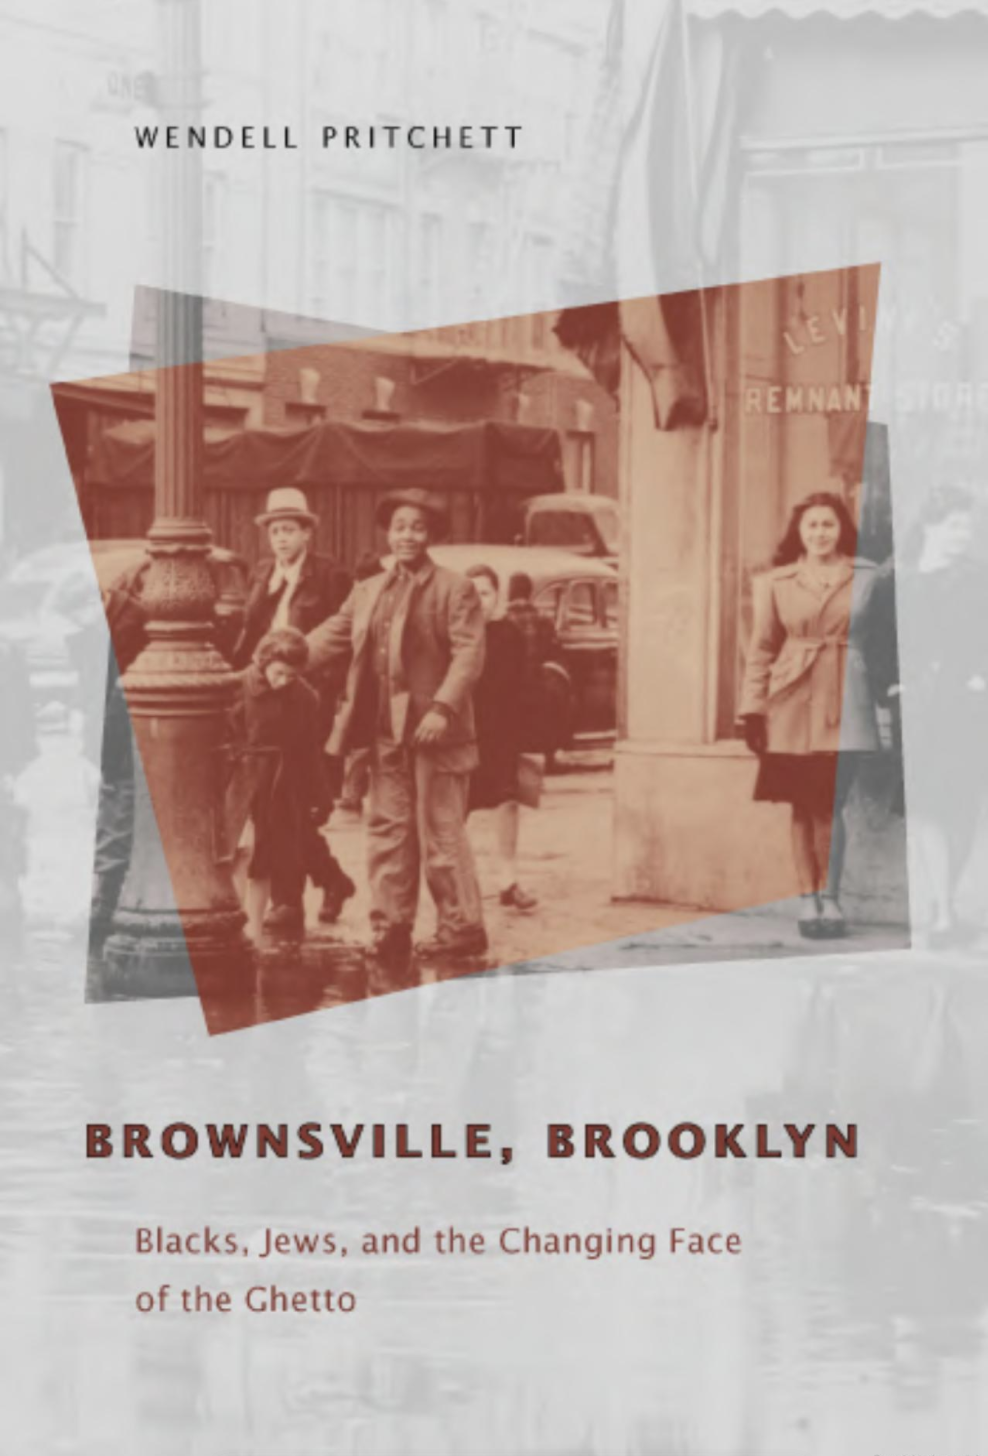 Brownsville, Brooklyn cover.